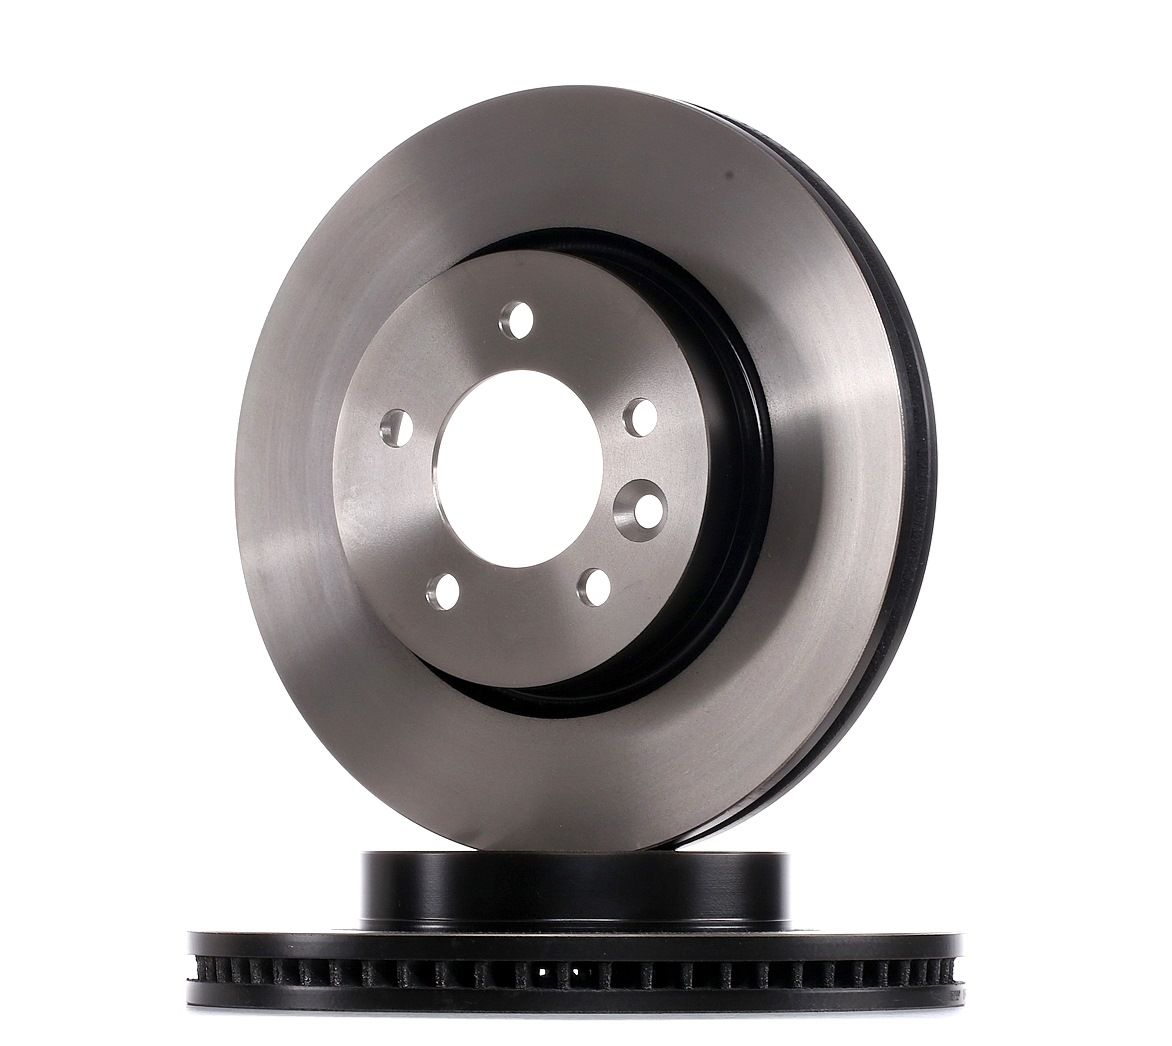 TRW 317x30mm, 5x120, Vented, Painted, High-carbon Ø: 317mm, Num. of holes: 5, Brake Disc Thickness: 30mm Brake rotor DF4790 buy